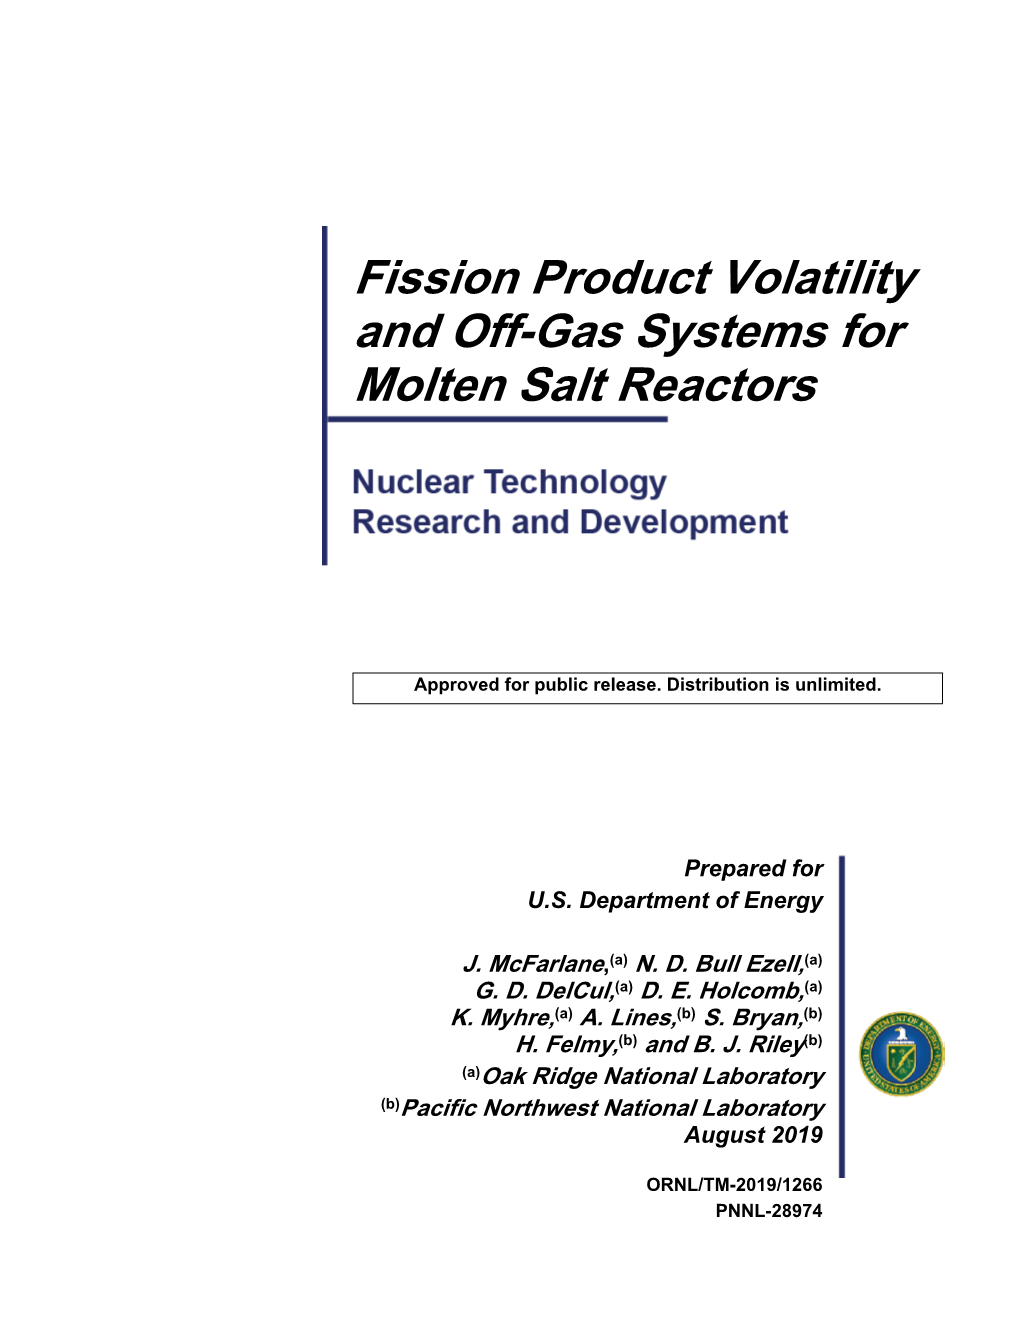 Fission Product Volatility and Off-Gas Systems for Molten Salt Reactors